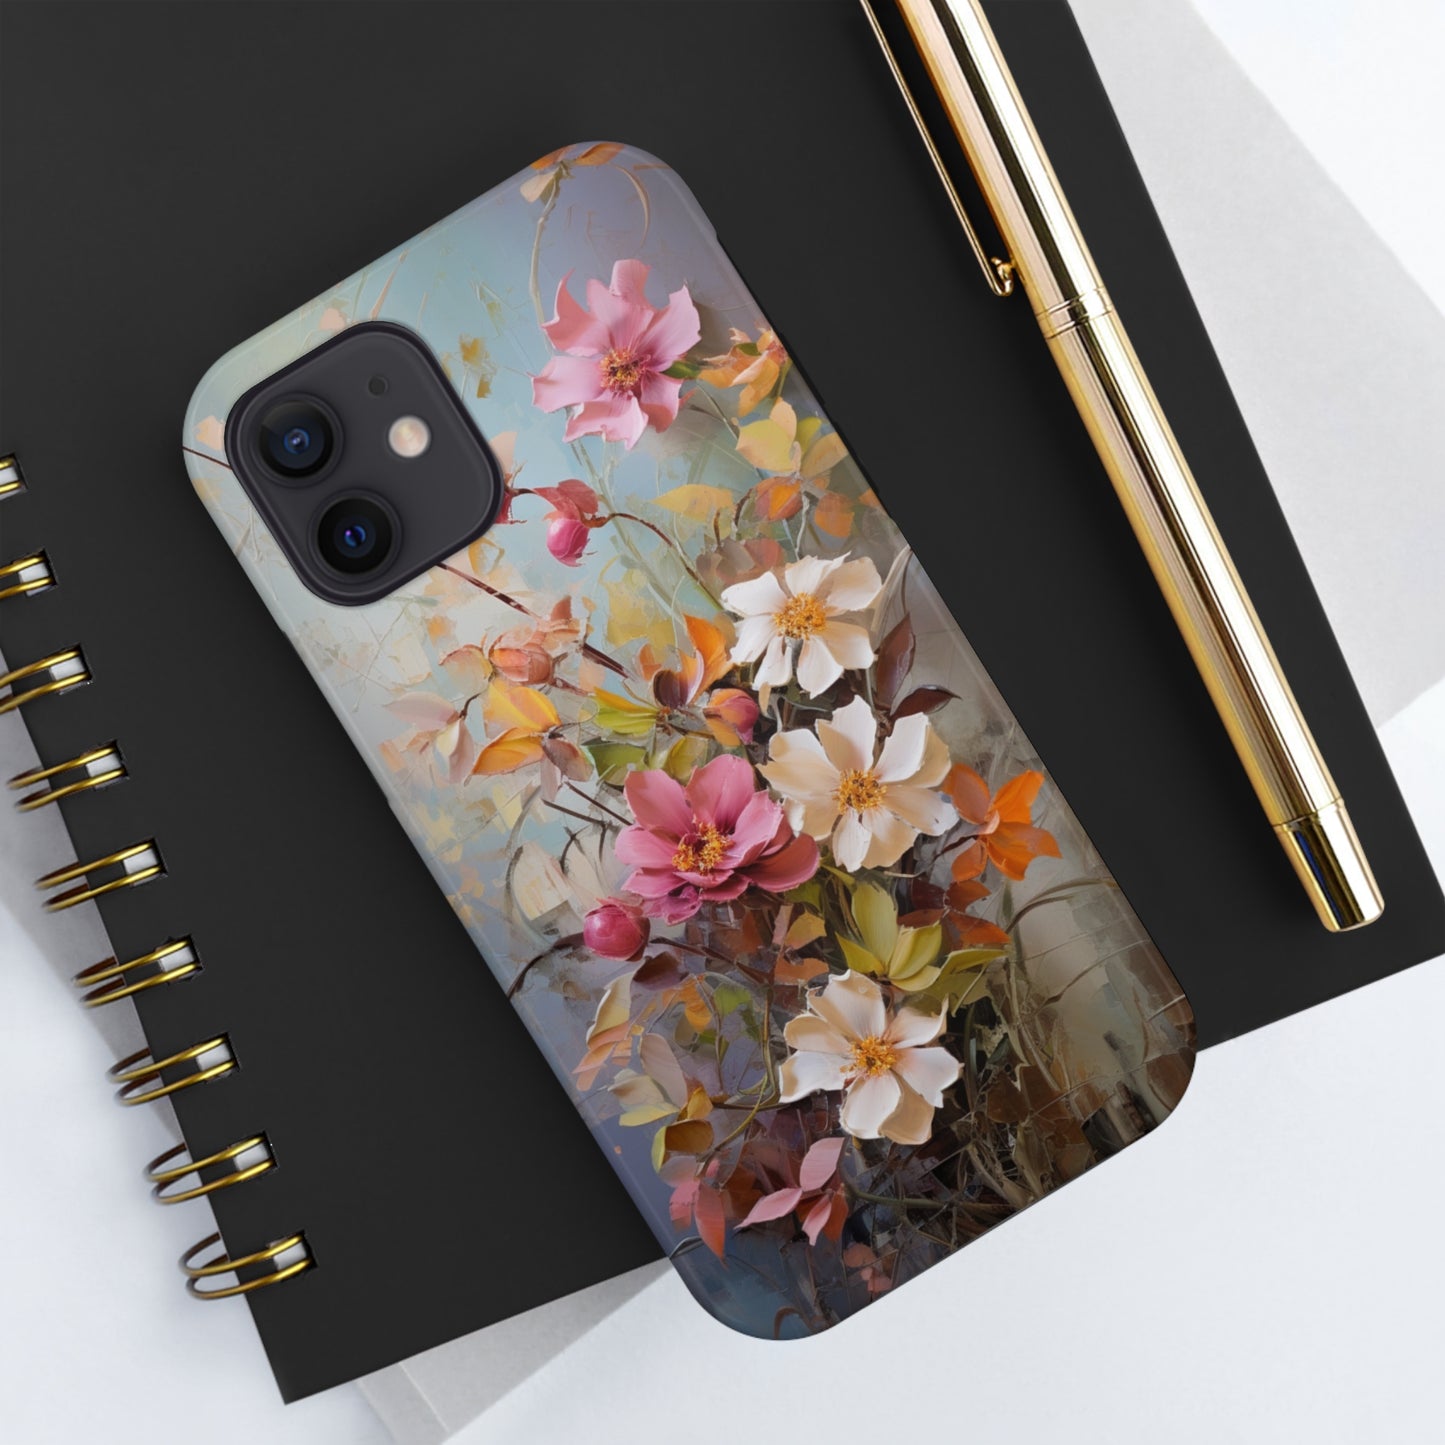 Floral Bliss Tough iPhone Case | Impact Resistant Phone Cover